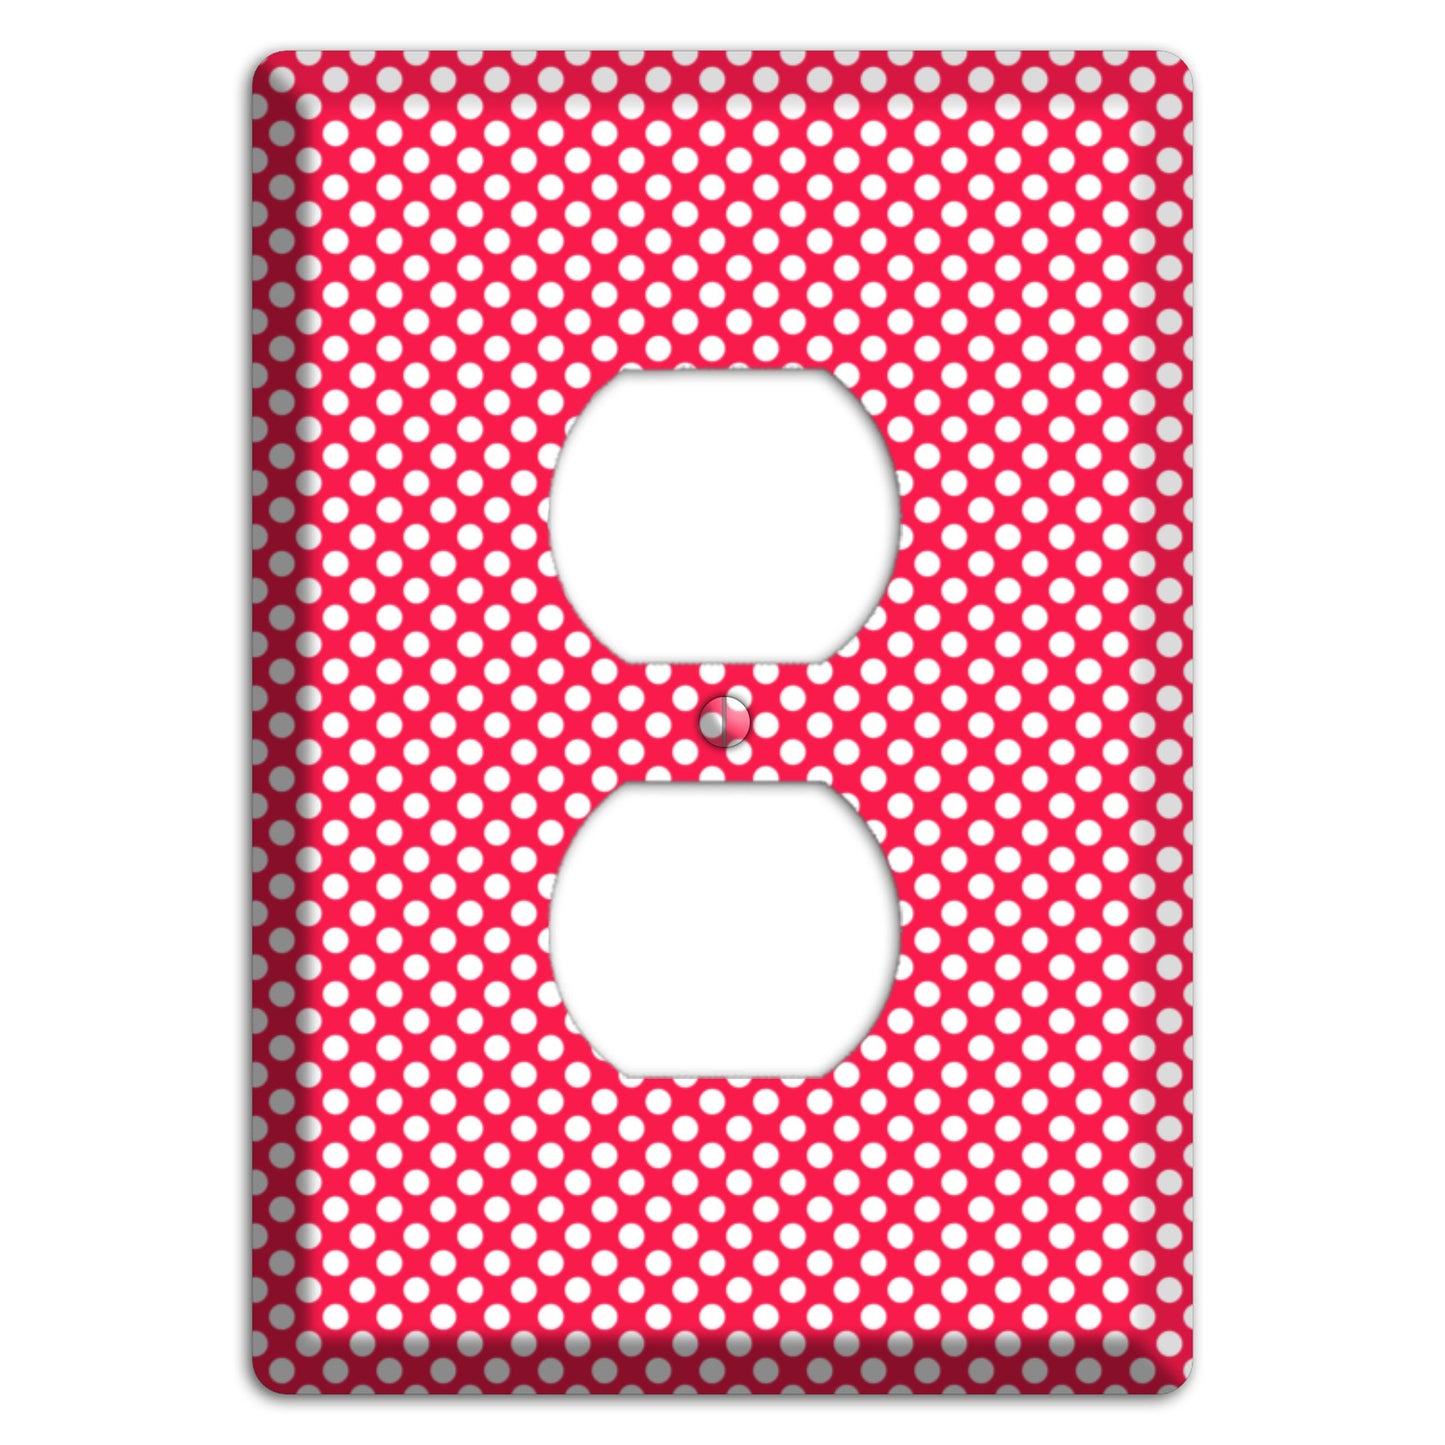 Fuschia with Pink Tiny Polka Dots Duplex Outlet Wallplate